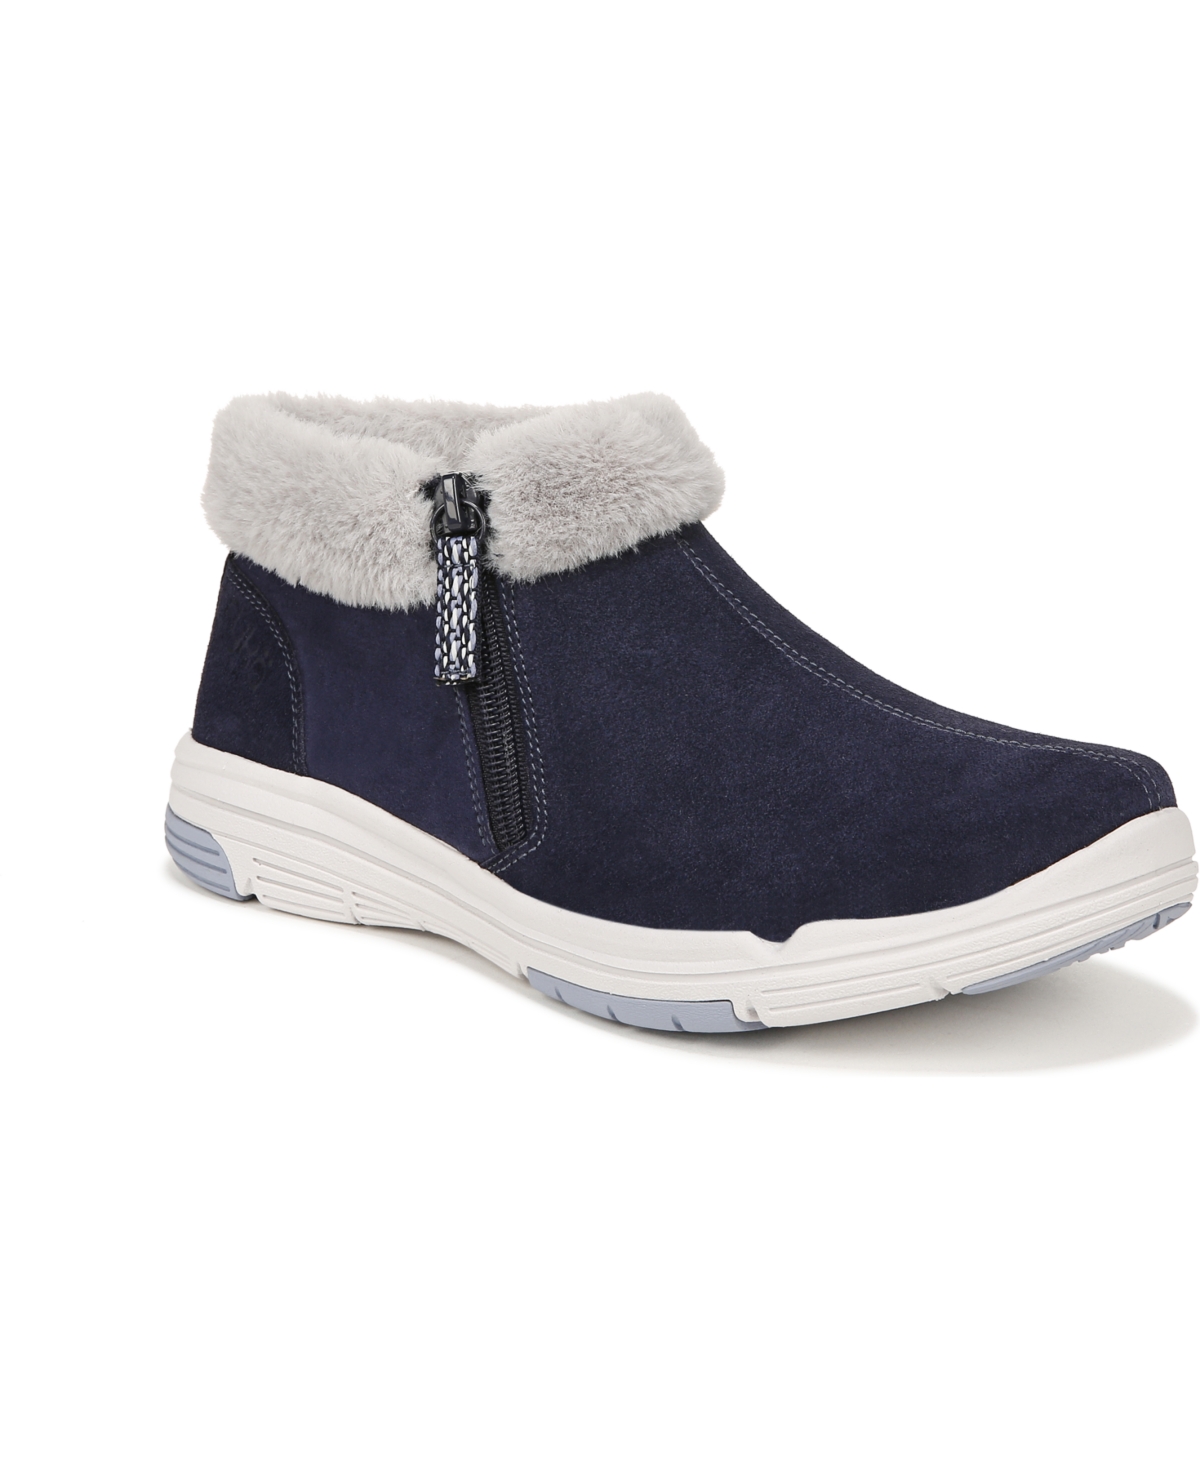 Women's Anchorge Mid Booties - Blue Suede